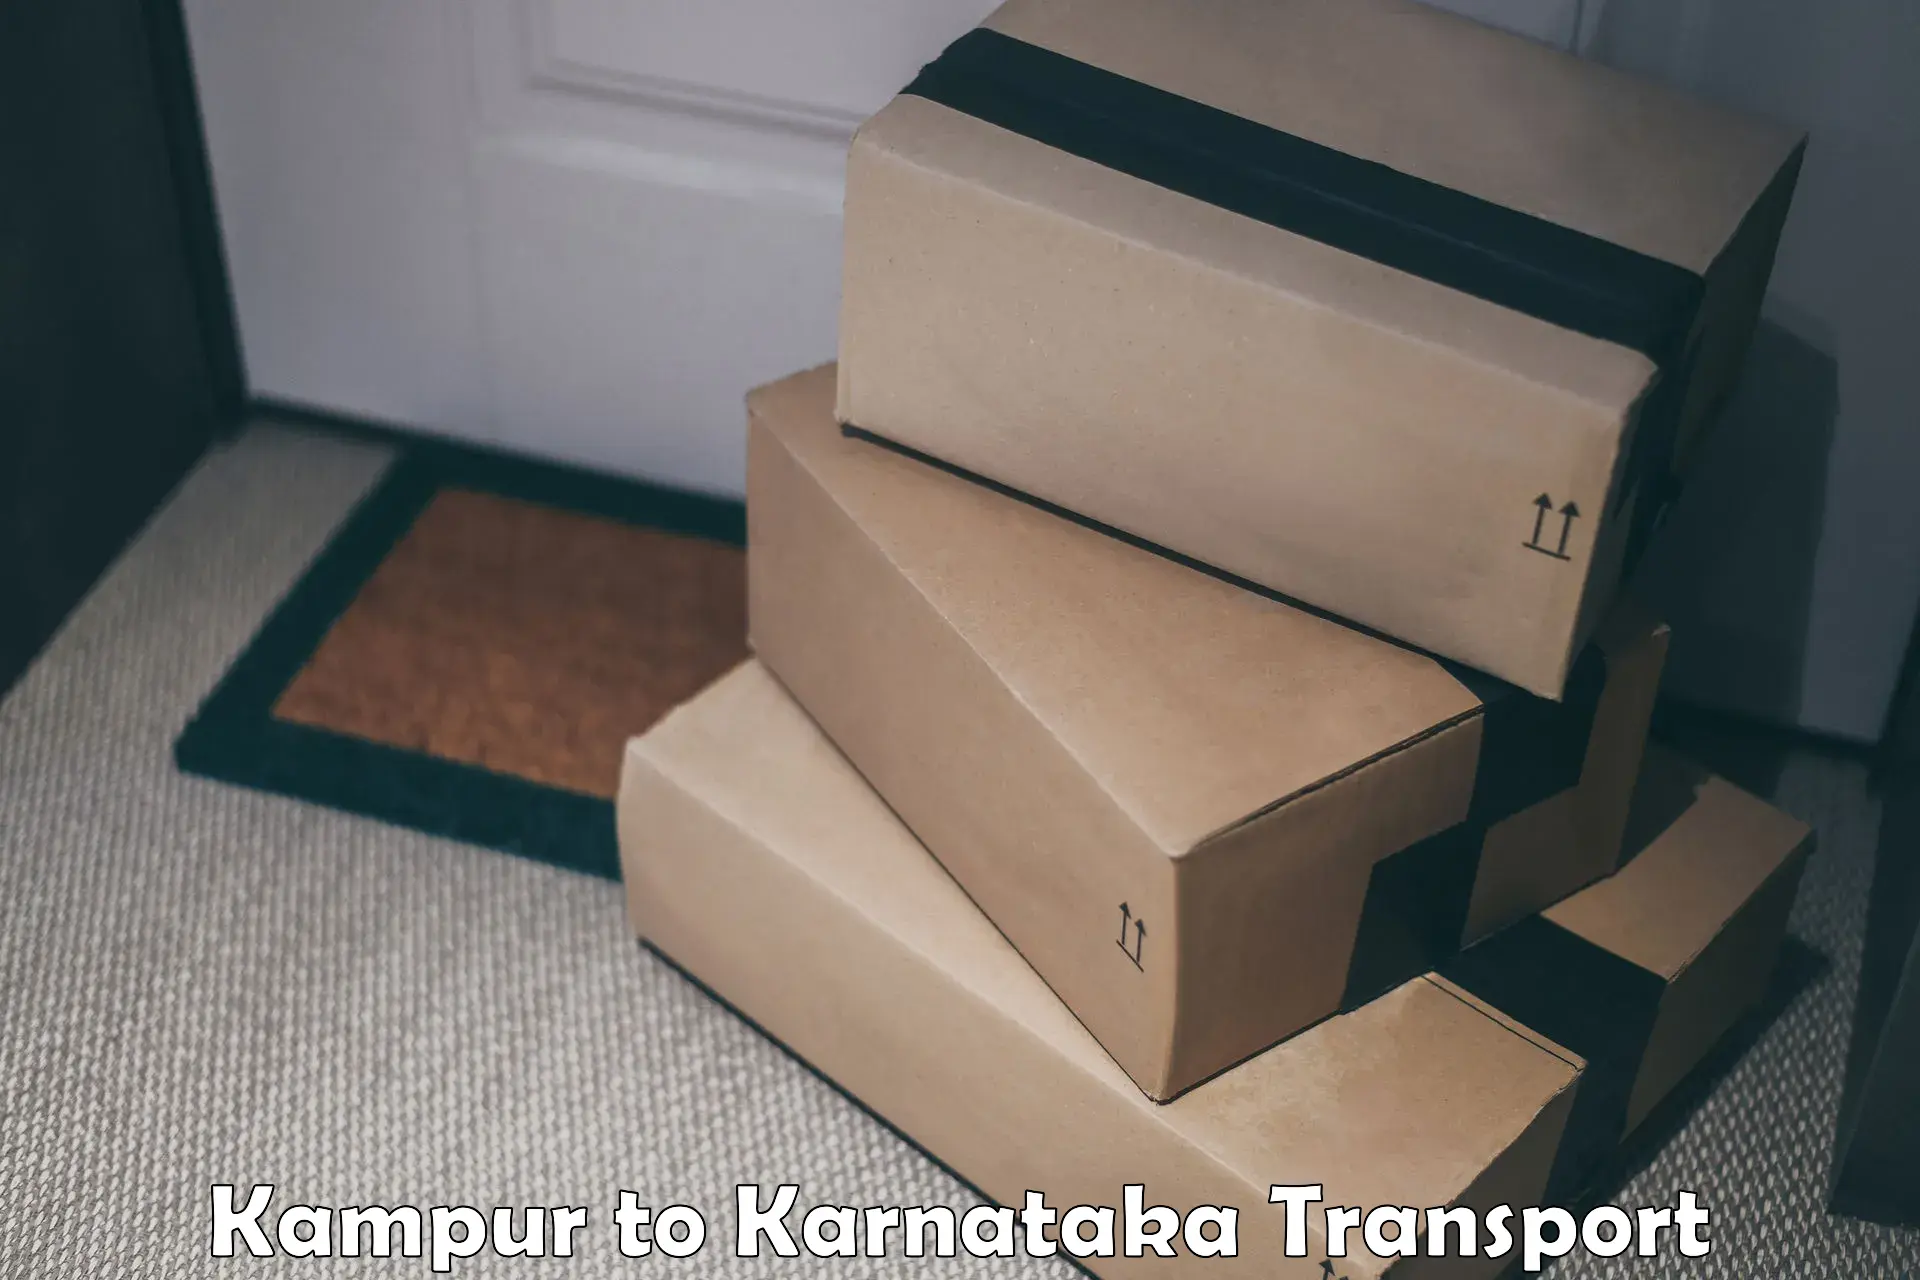 Truck transport companies in India Kampur to Chincholi